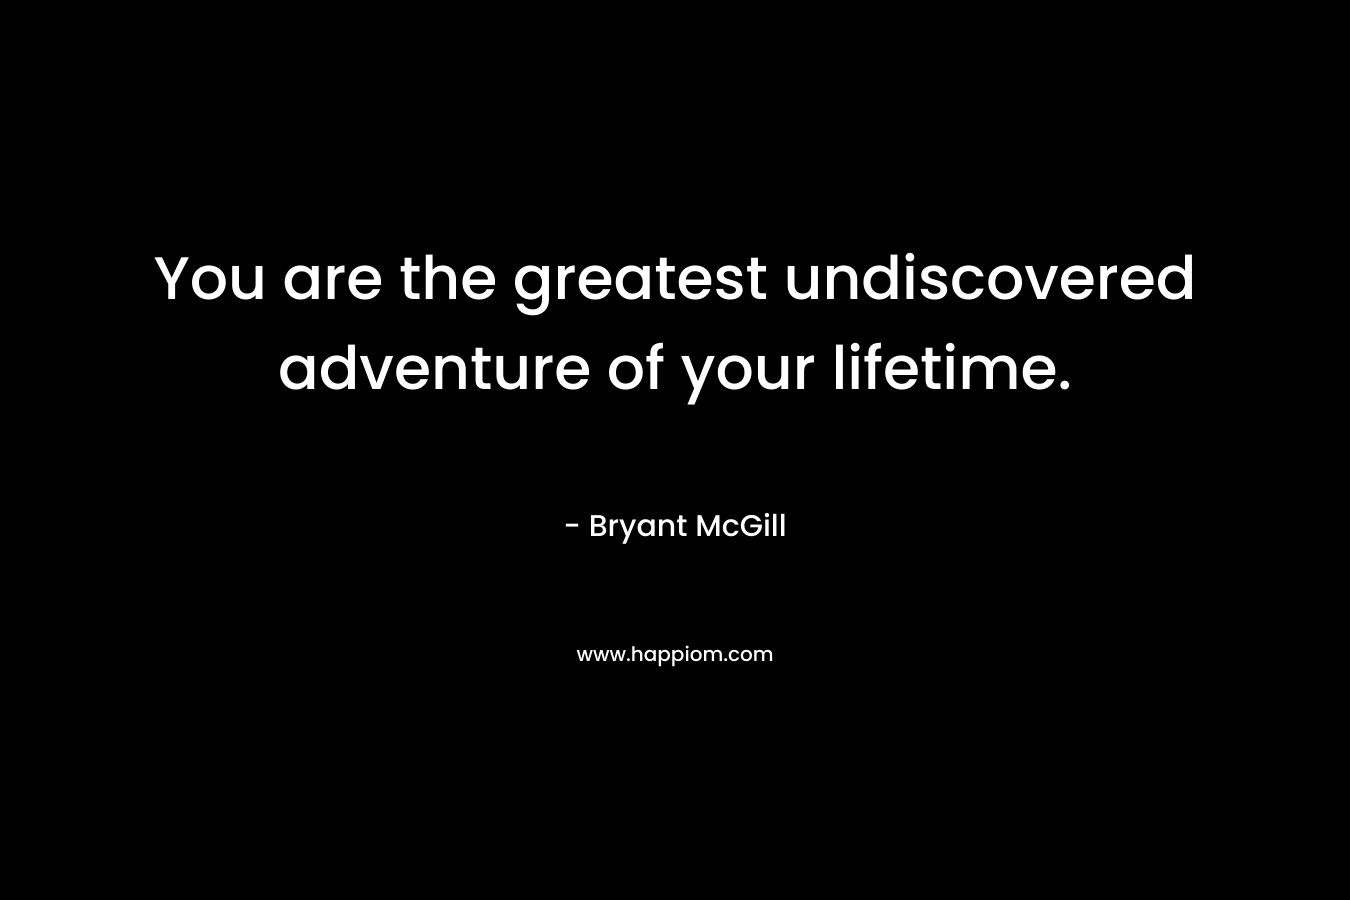 You are the greatest undiscovered adventure of your lifetime. – Bryant McGill